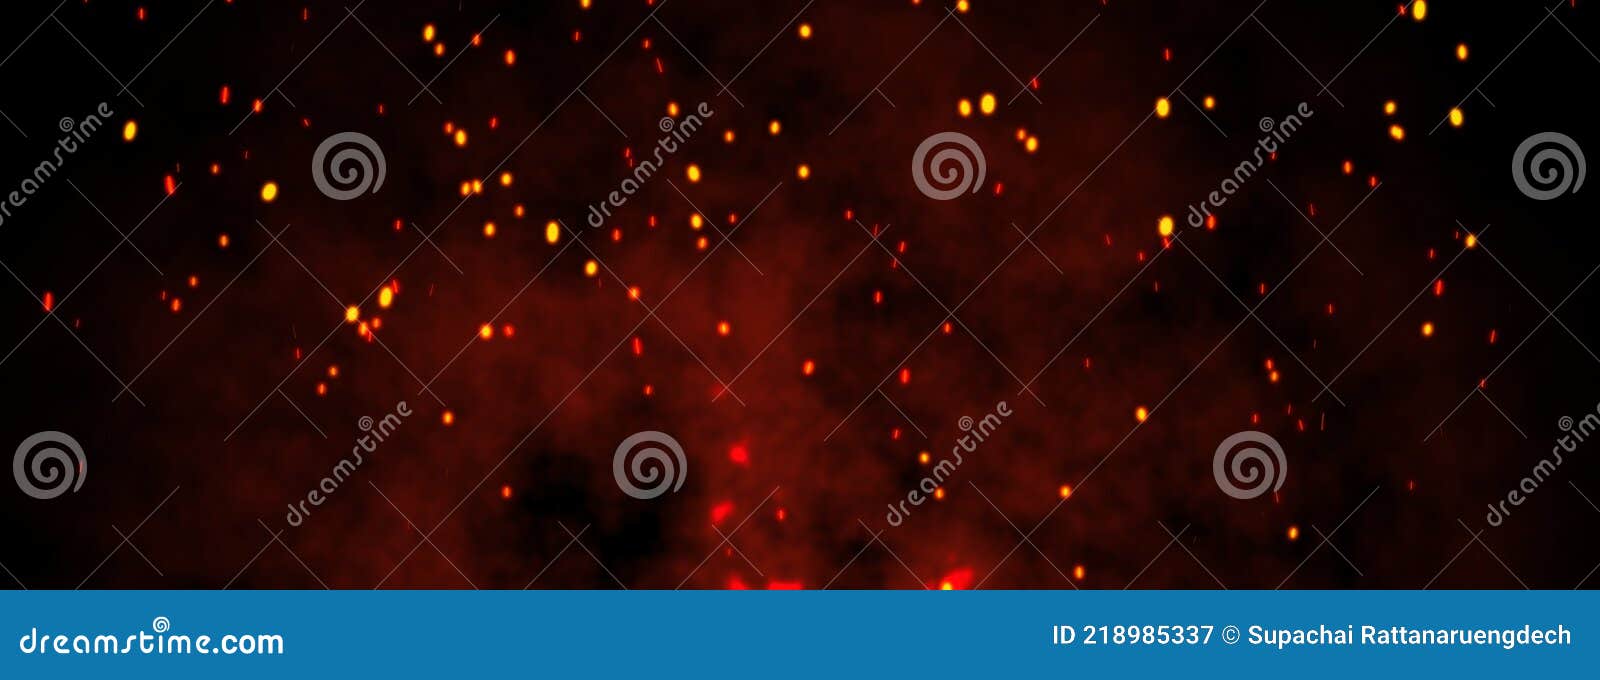 fire embers particles over black background